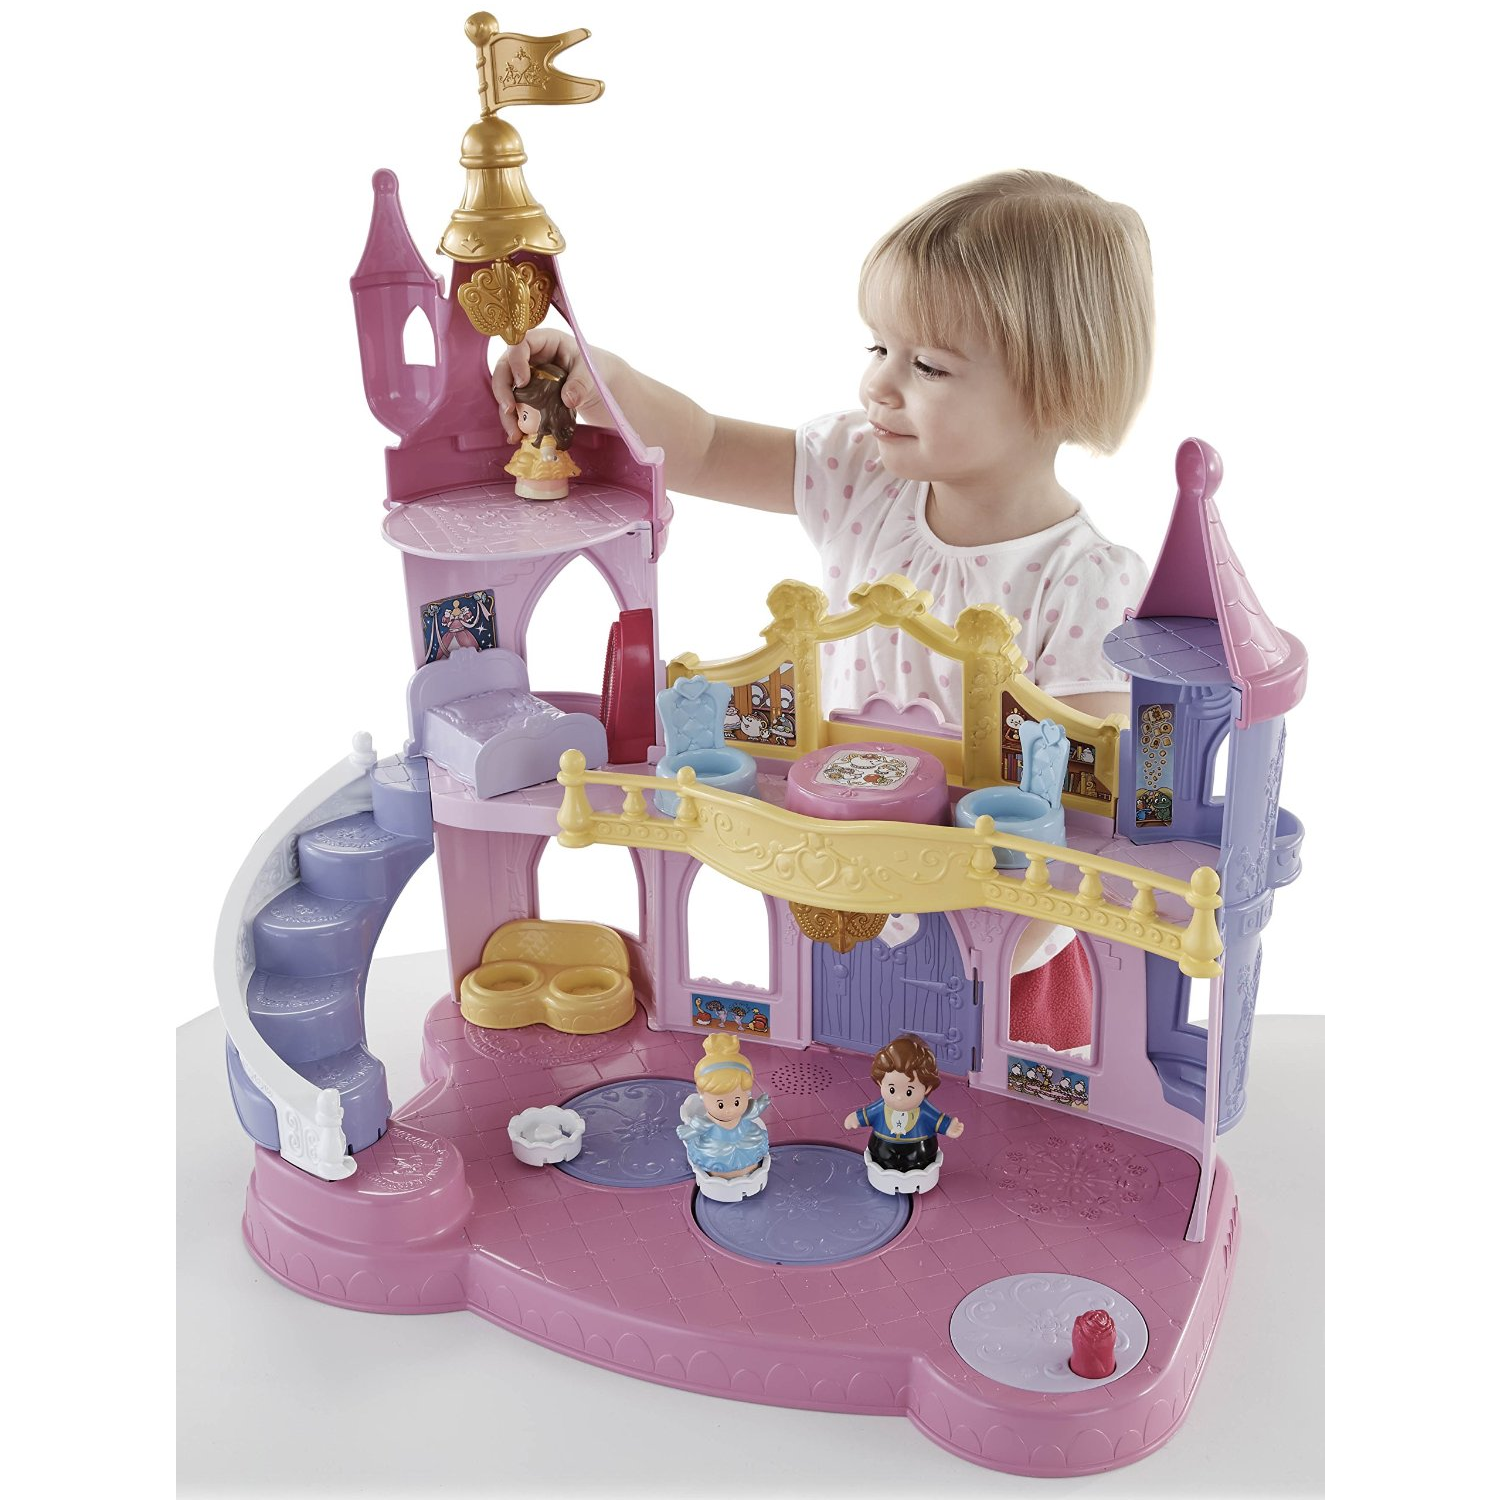 Fisher-Price Little People Disney Princess Musical Dancing Palace Only $15.19 on Amazon! (Reg $29.99)